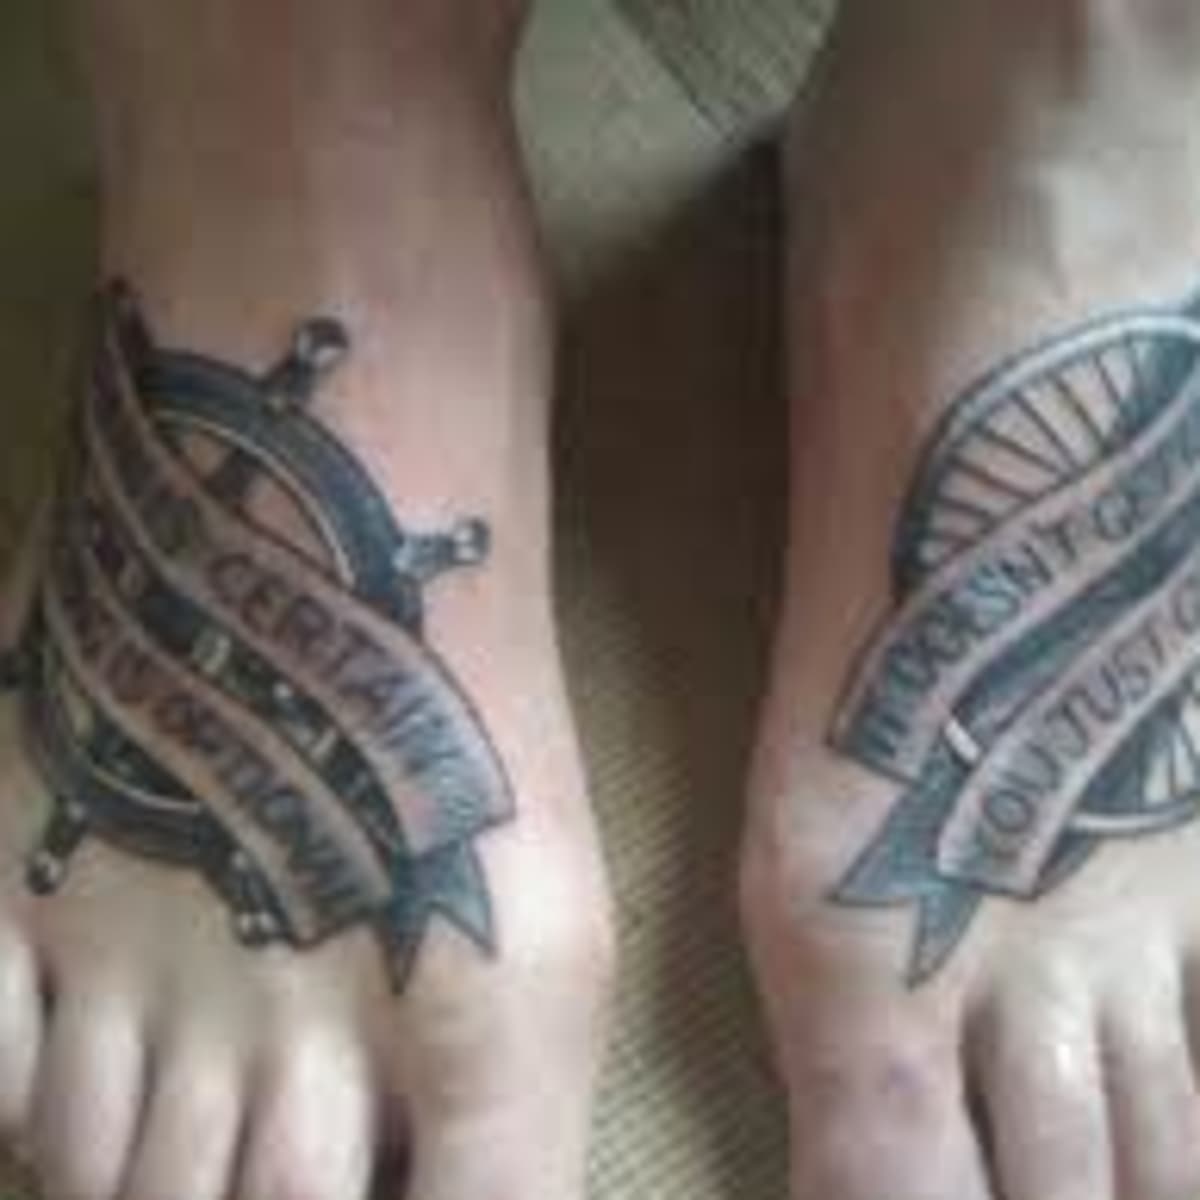 Ship S Wheel Tattoos Designs And Meanings Tatring